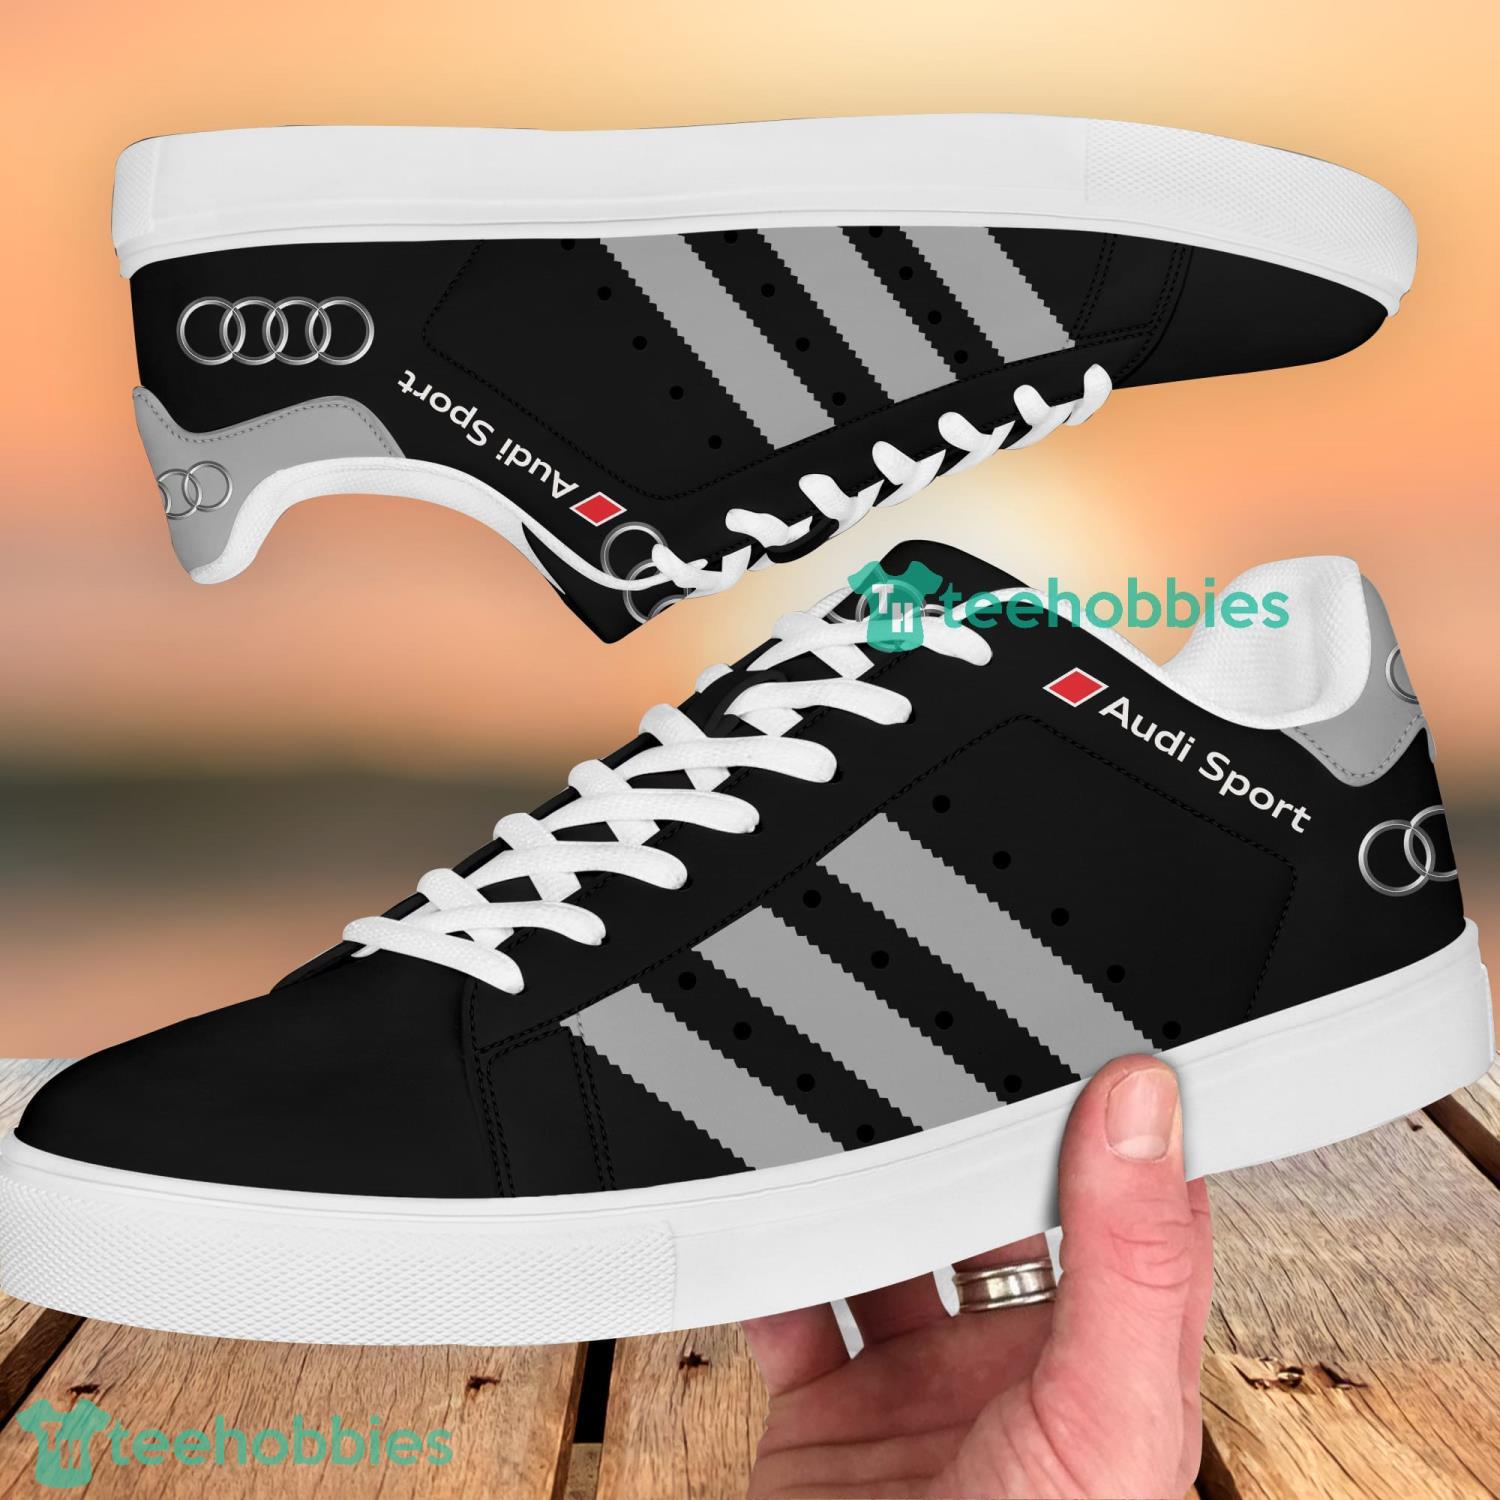 Audi Sport Car 958 Gifts Lover AOP Low Top Skate Shoes For Men And